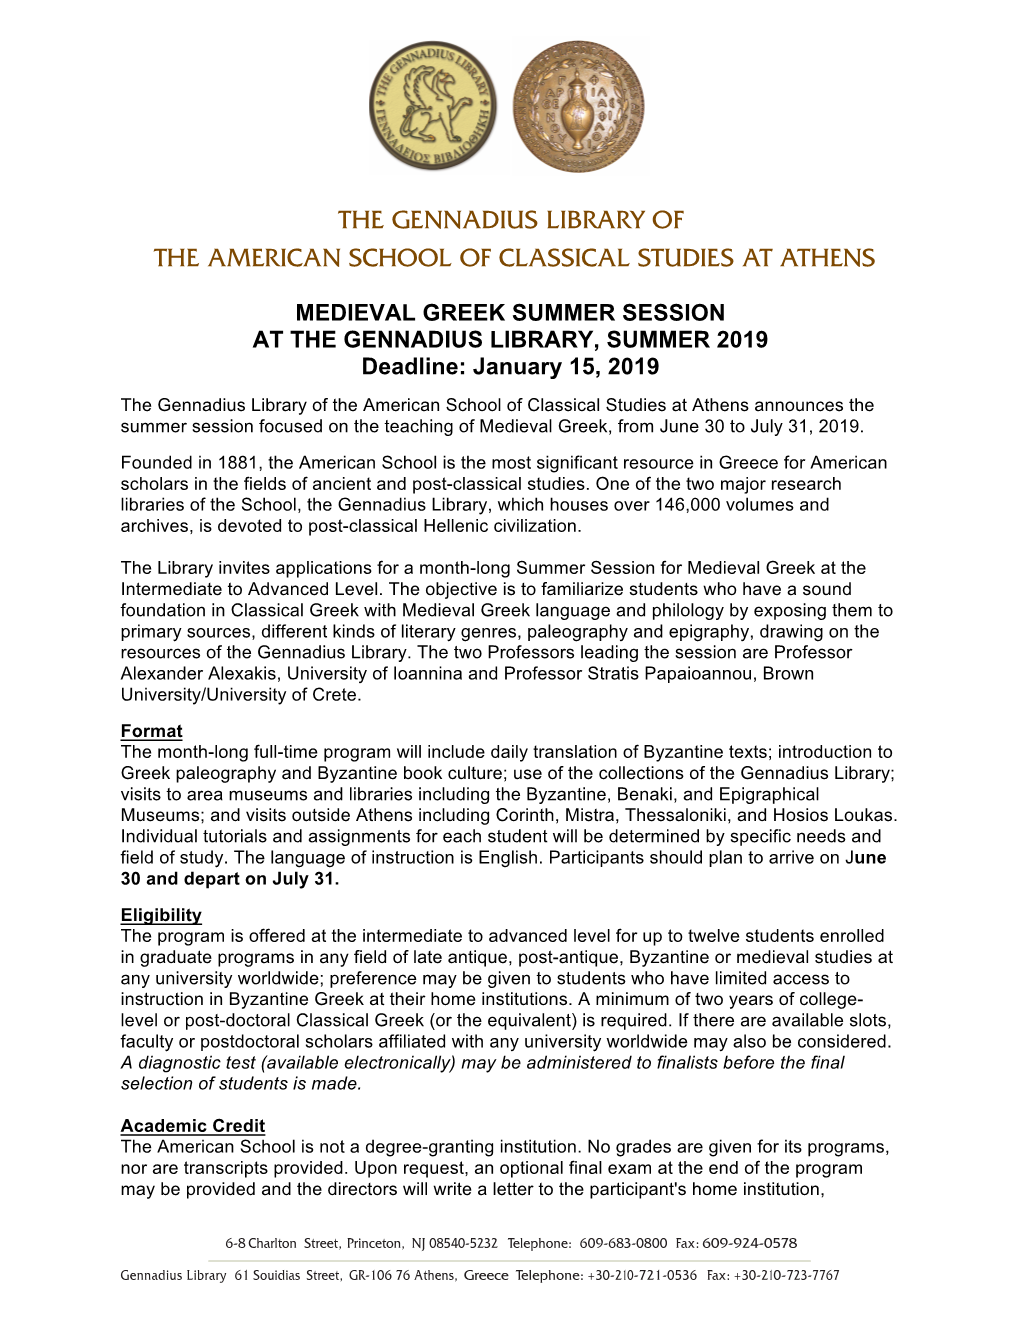 The Gennadius Library of the American School of Classical Studies at Athens